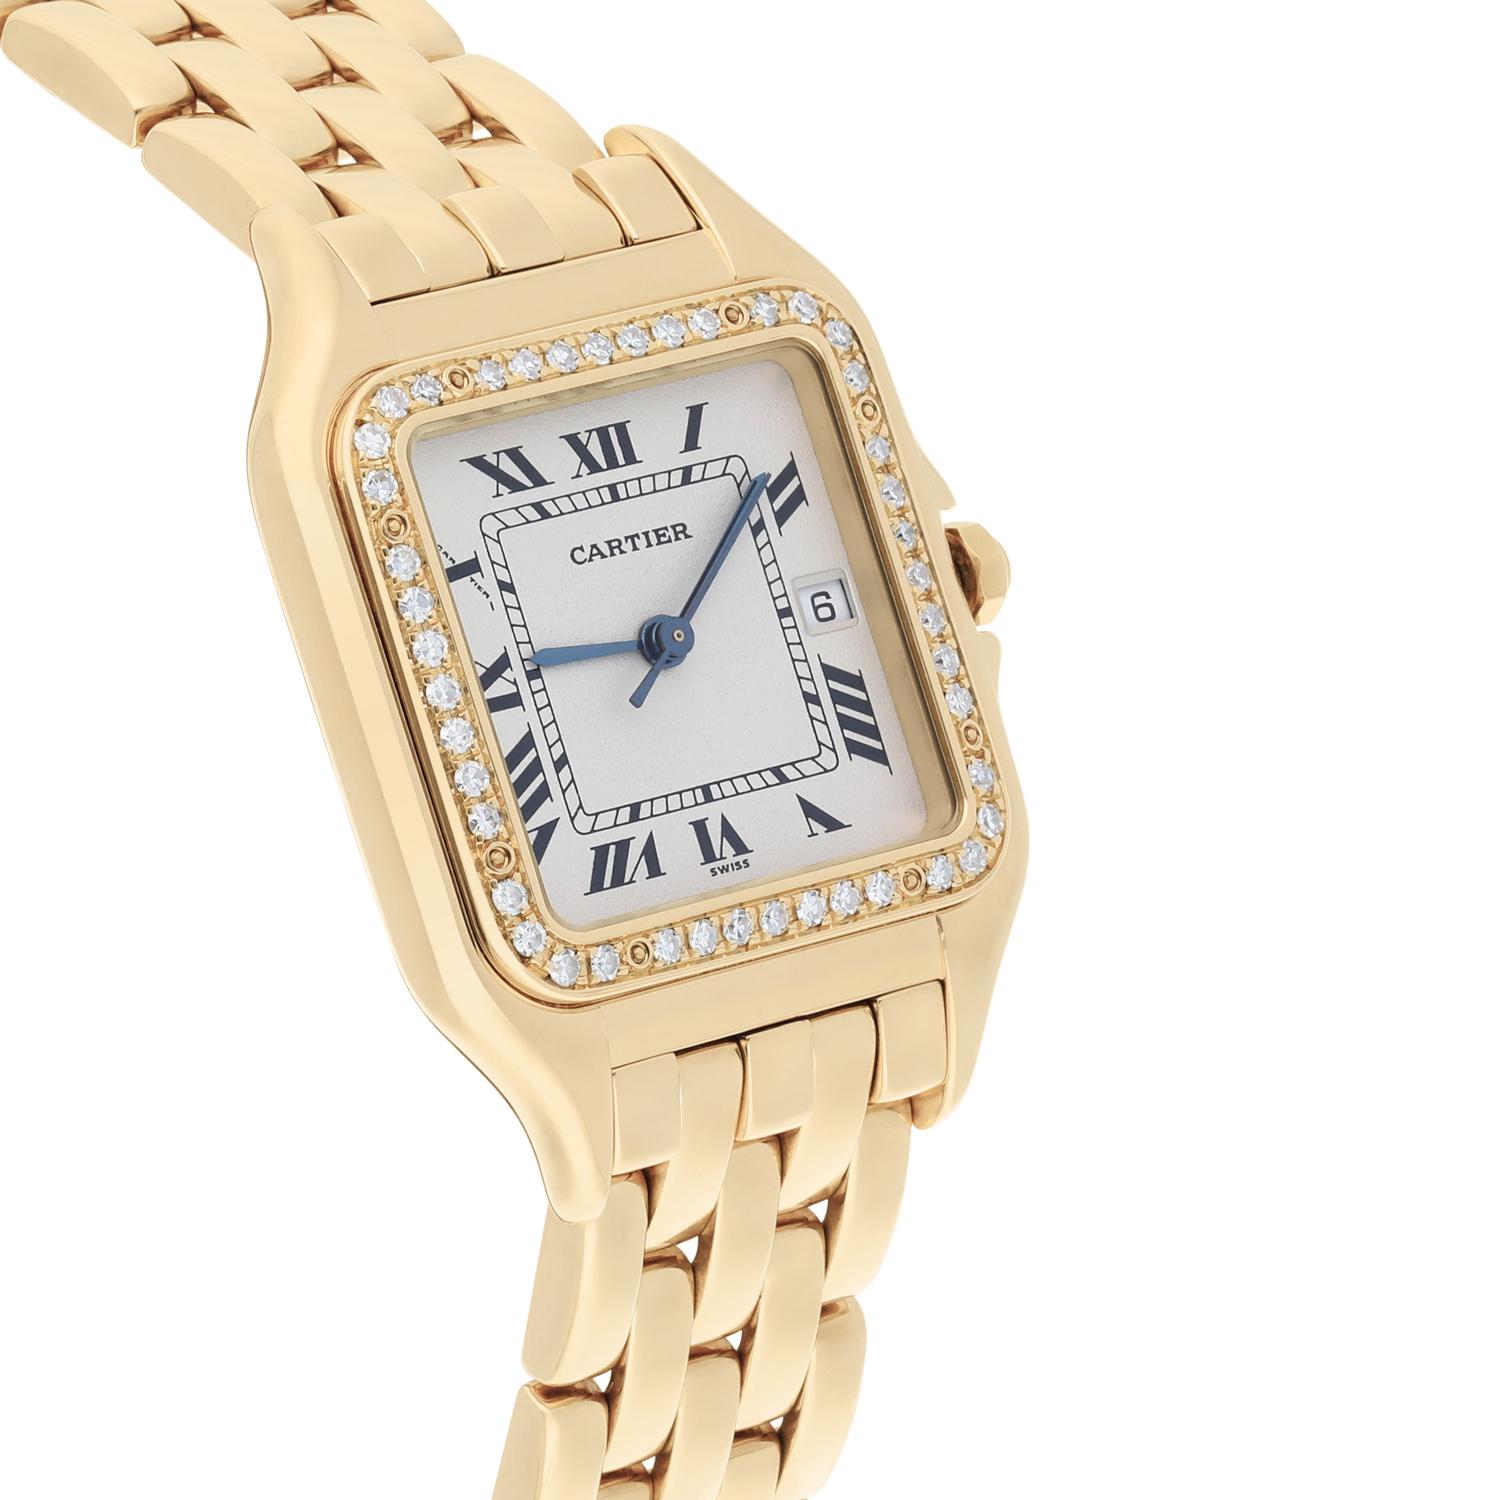 Women's Cartier Panthere 29mm Ladies Large 18K Yellow Gold Watch with Diamonds 887968